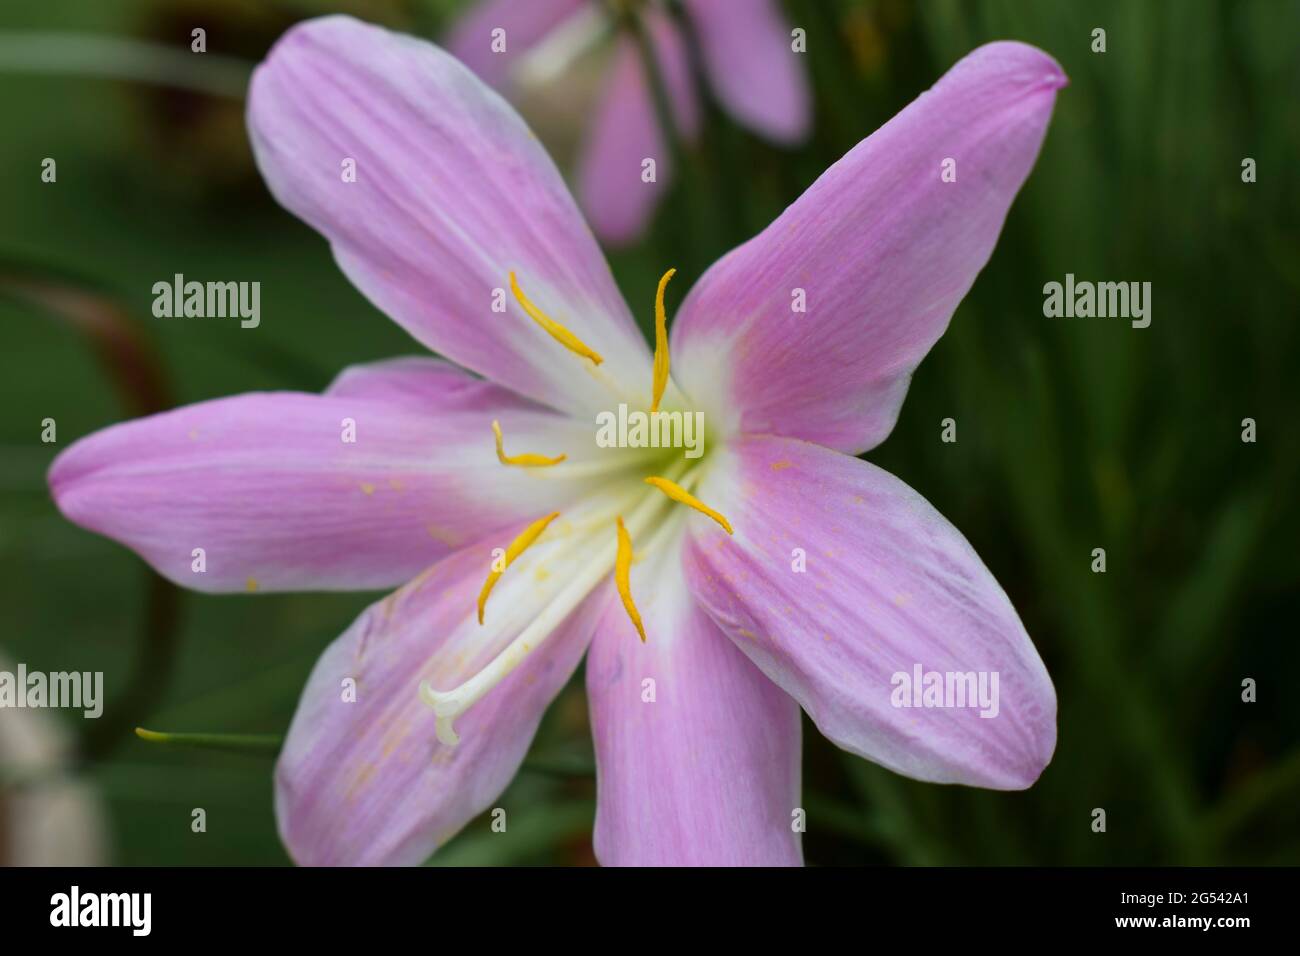 Closeup of Rain lily flower in pink color also known as Zephyranthes carinata. Indian flowering plants Stock Photo